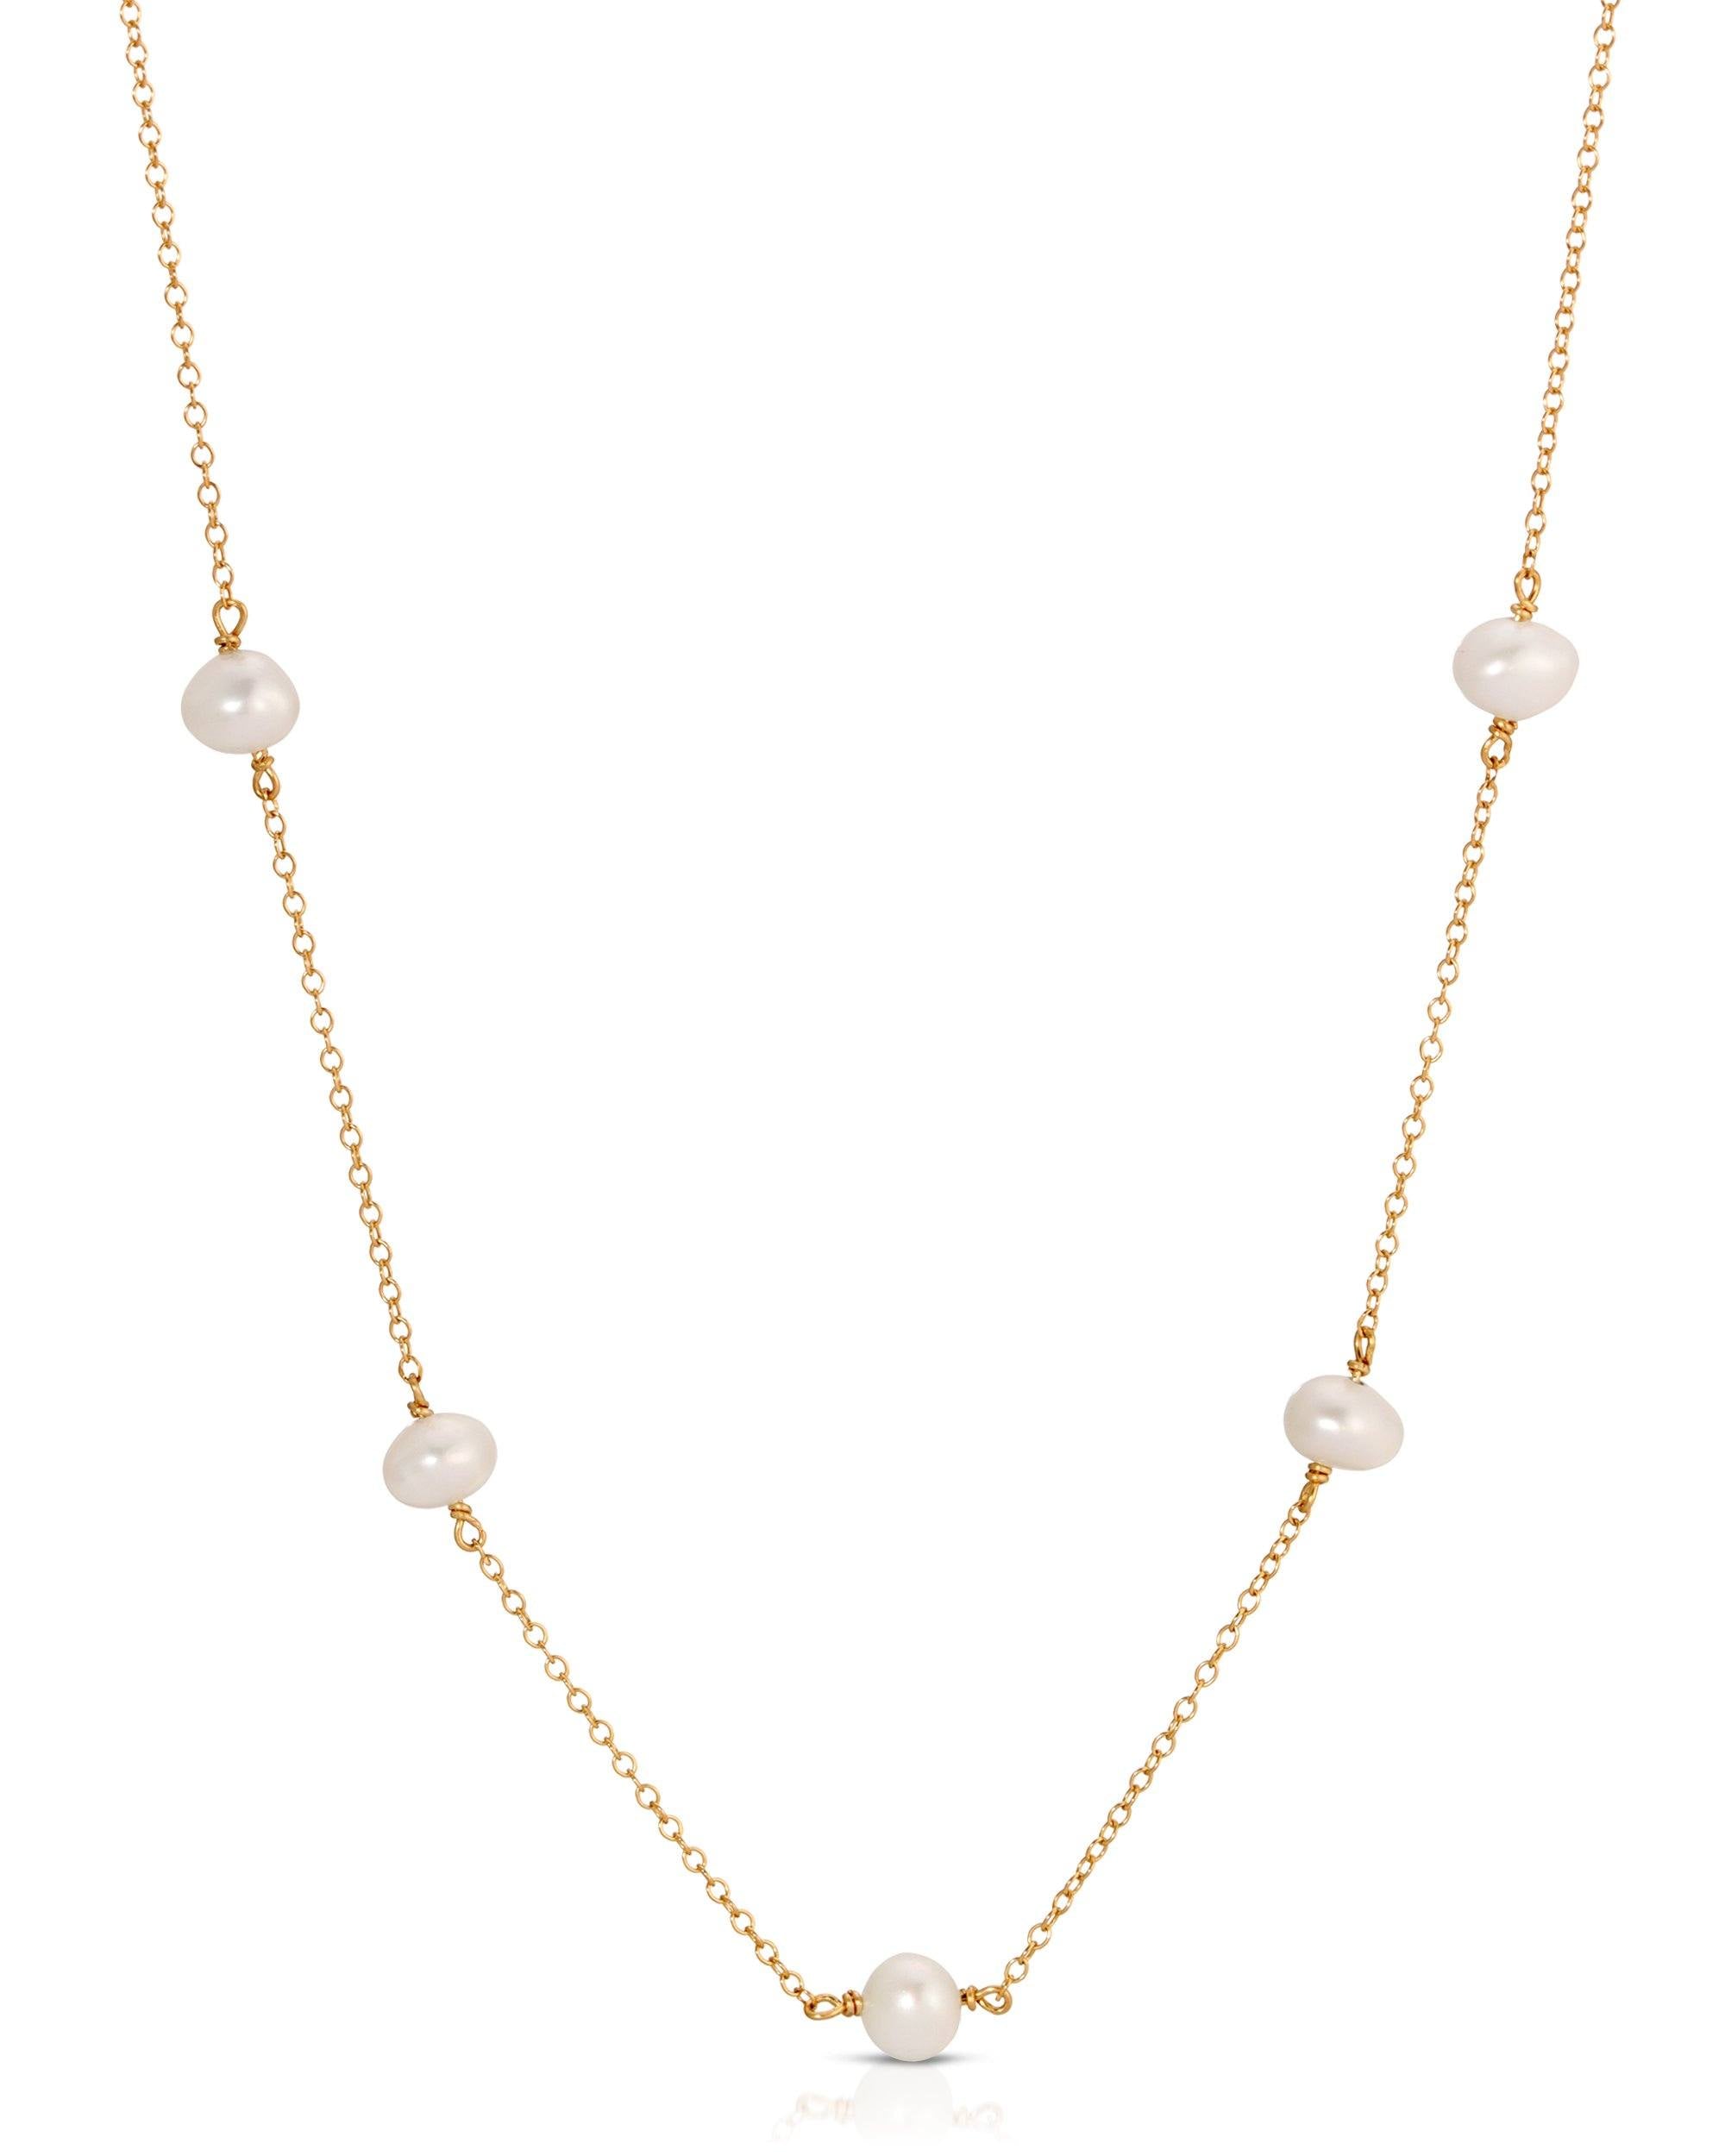 Lajos Necklace by KOZAKH. A 16 to 18 inch adjustable length necklace, crafted in 14K Gold Filled, featuring irregular white freshwater Pearls.